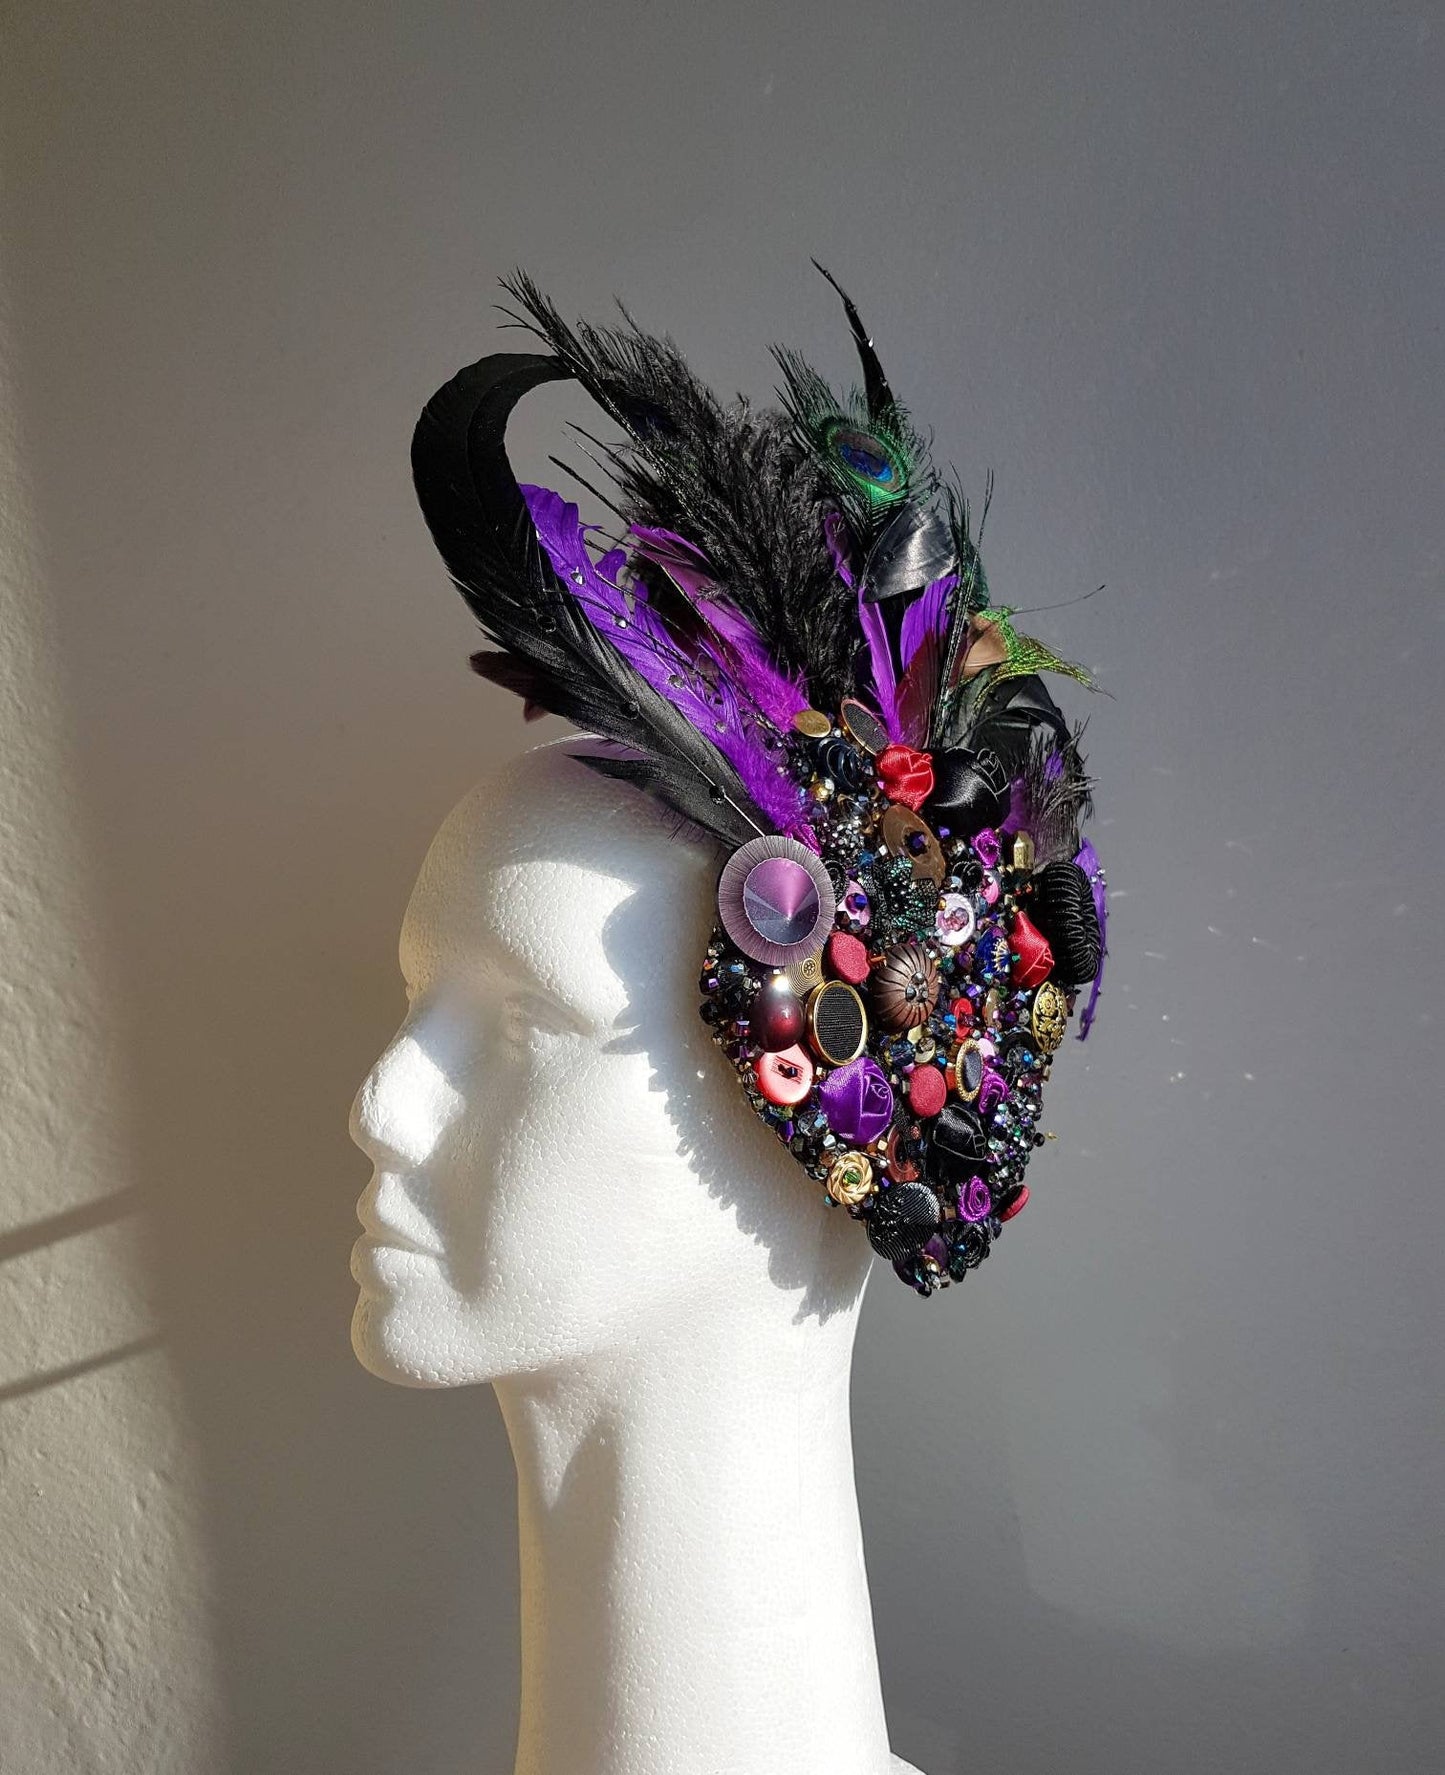 Harlequin Collection: The Harlequin Butterfly Wings hair ornament